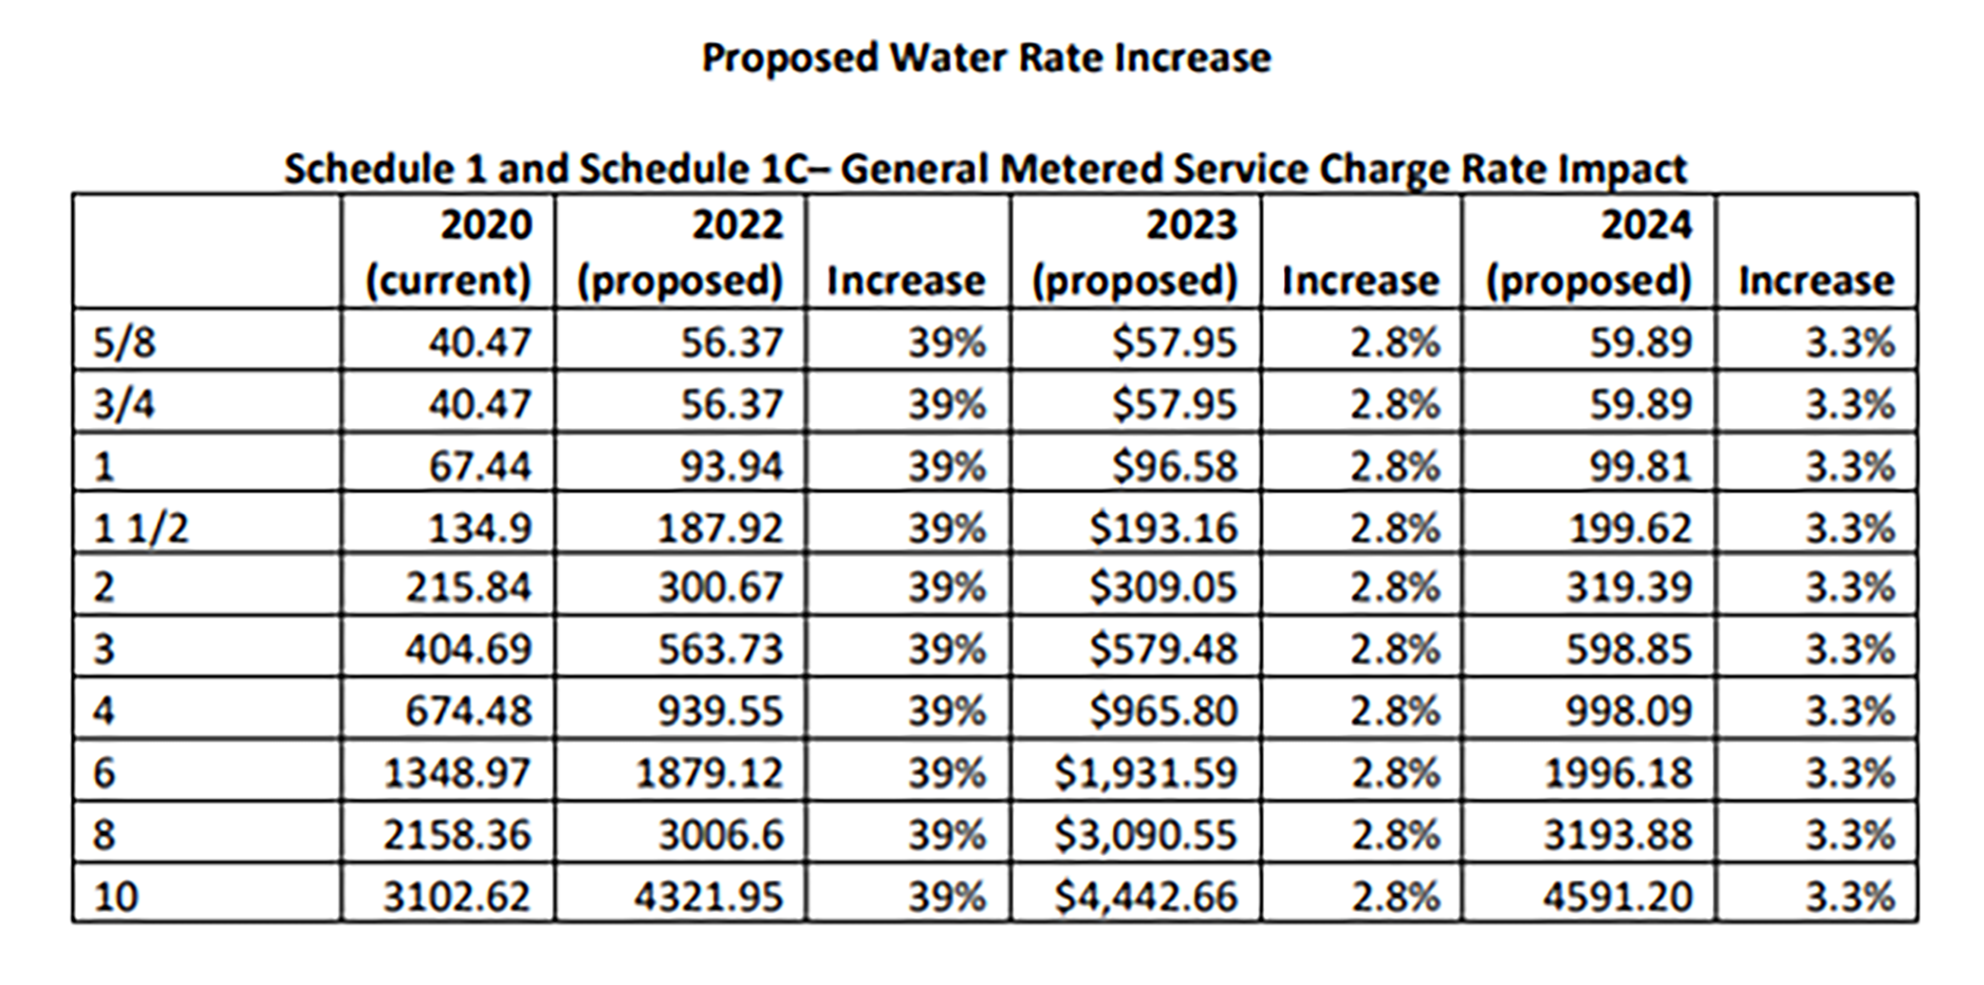 Proposed water rate increase table 2022-2024